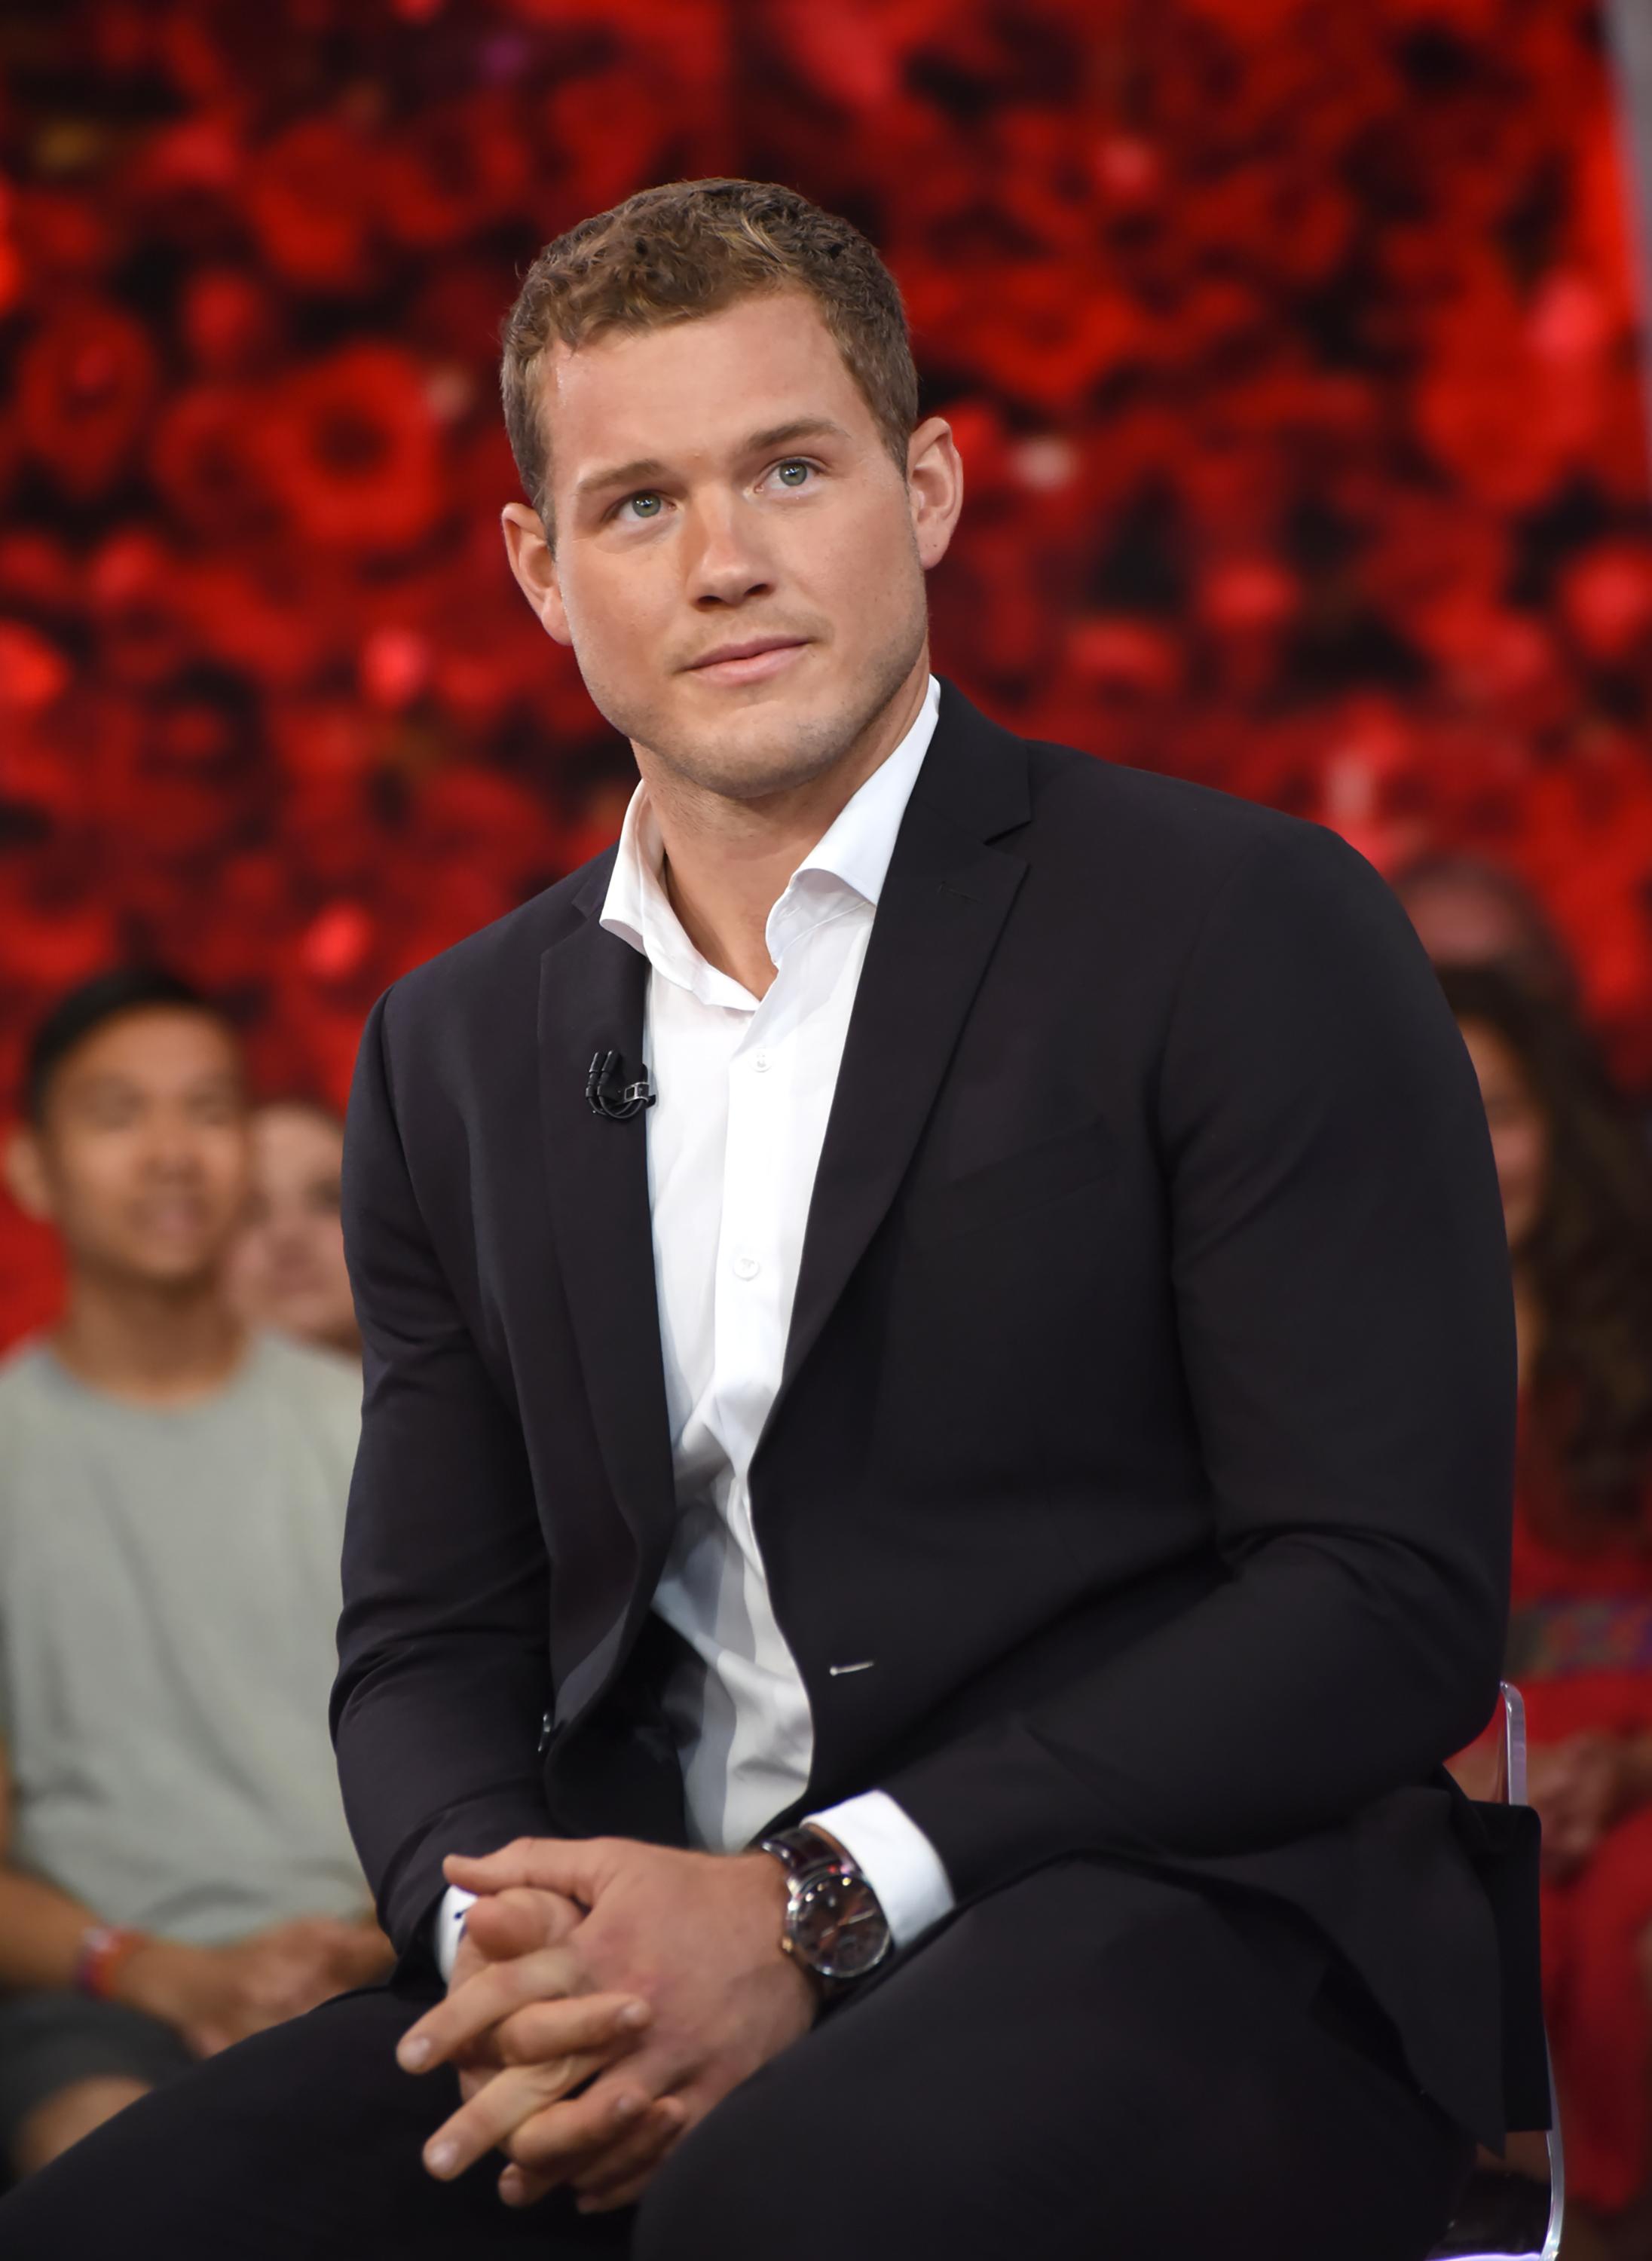 Get to know the next Bachelor, Colton Underwood | DC Refined